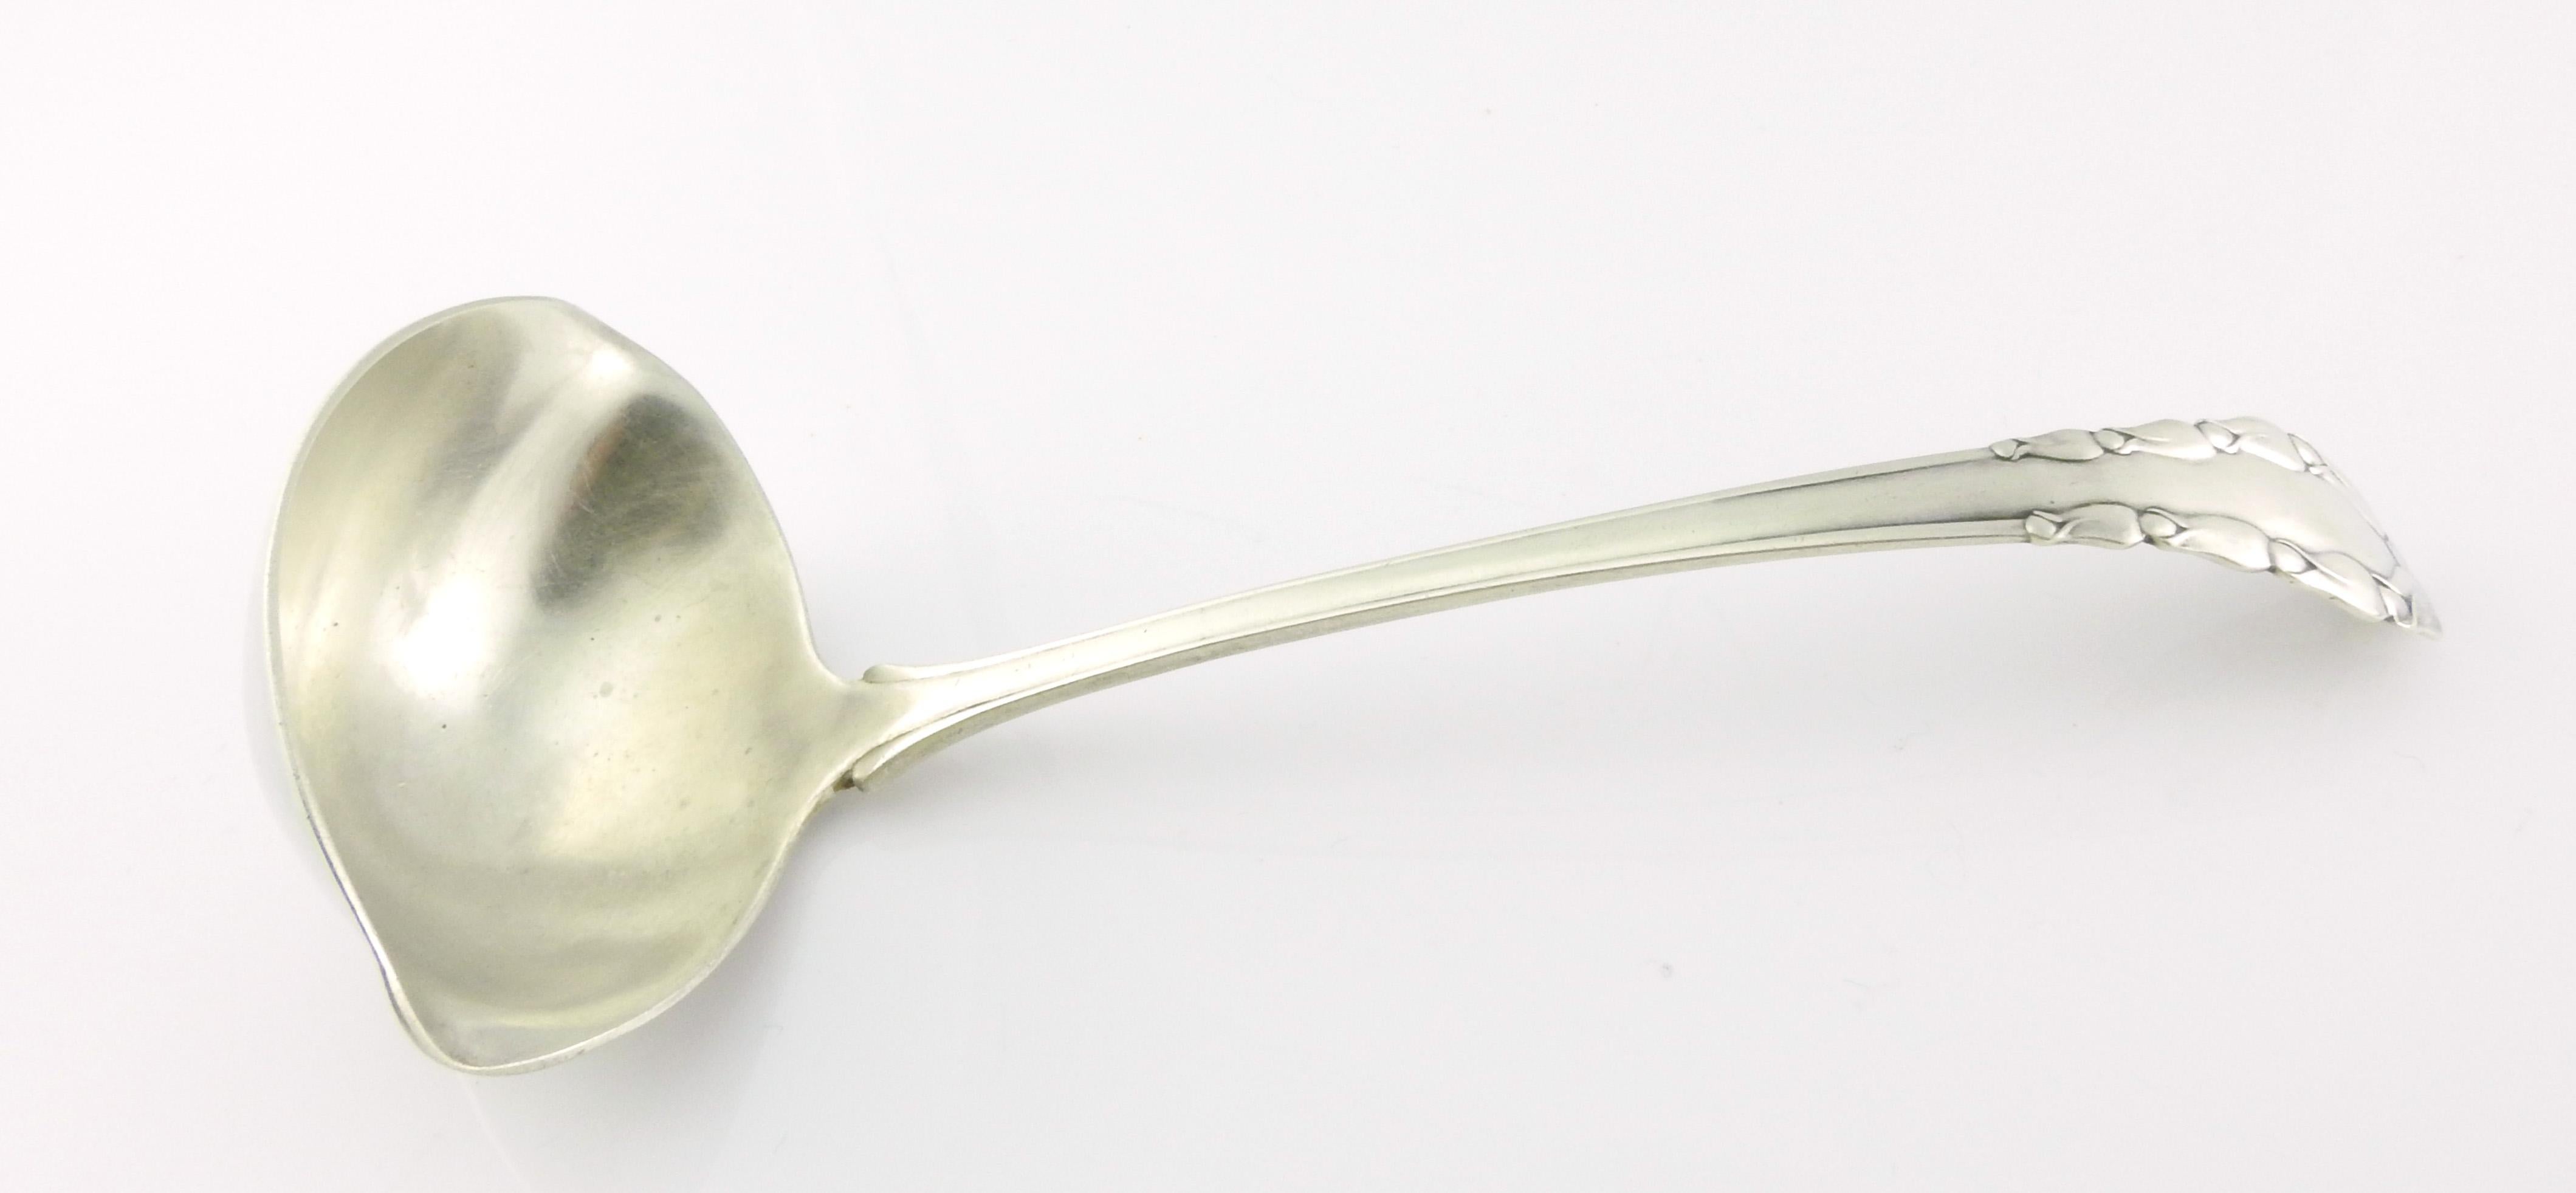 Georg Jensen Denmark 1913 lily of the valley solid gravy ladle

This is a lovely sterling silver gravy ladle with spout, in the pattern 1913 Lily of the Valley by Georg Jensen.

Measurement: Measures approximate 7 inches in length. Bowl